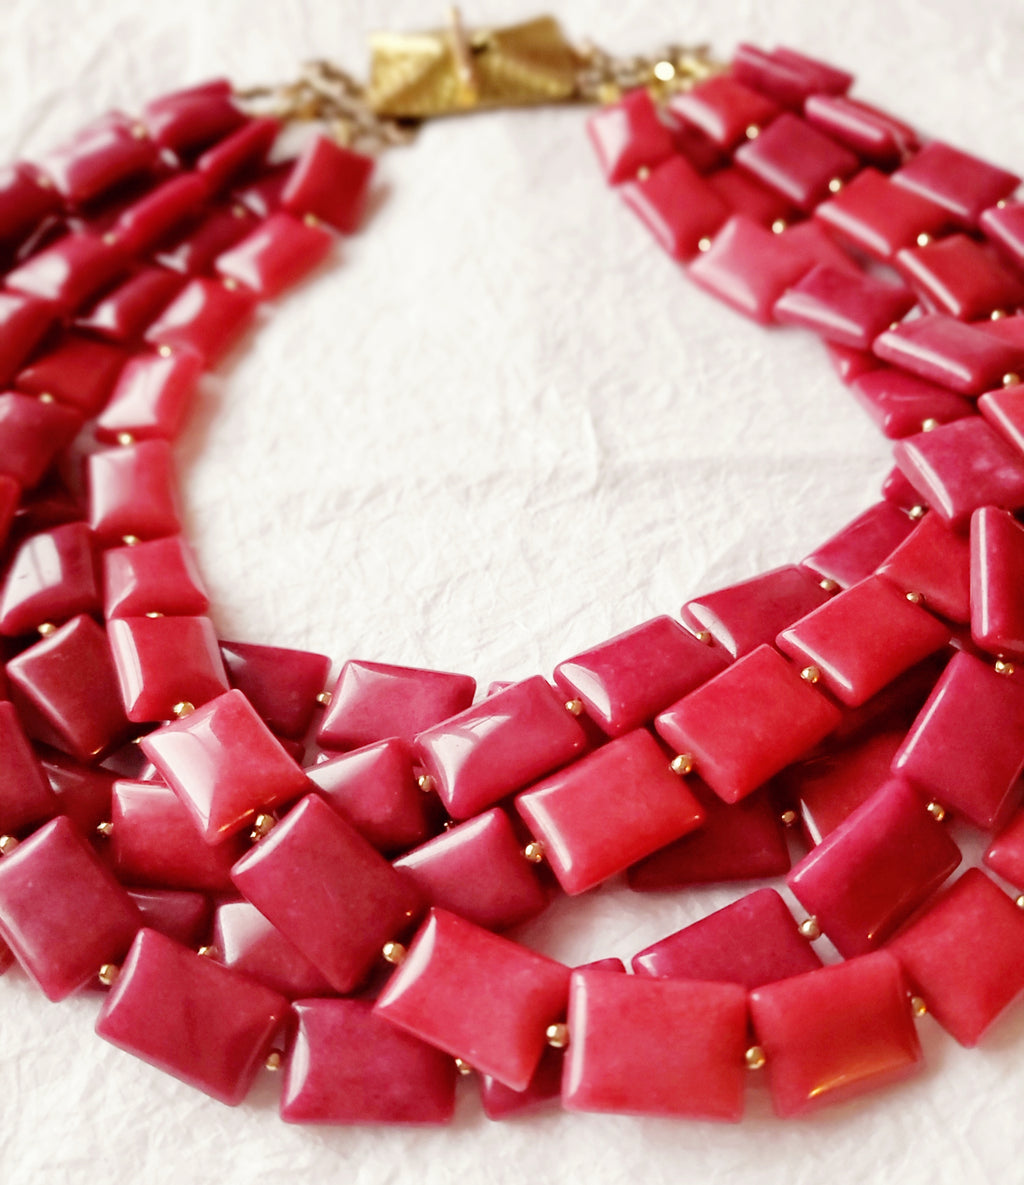 Raspberry Squares 6 Strand Multistrand Pink Berry Fuchsia Statement Necklace 